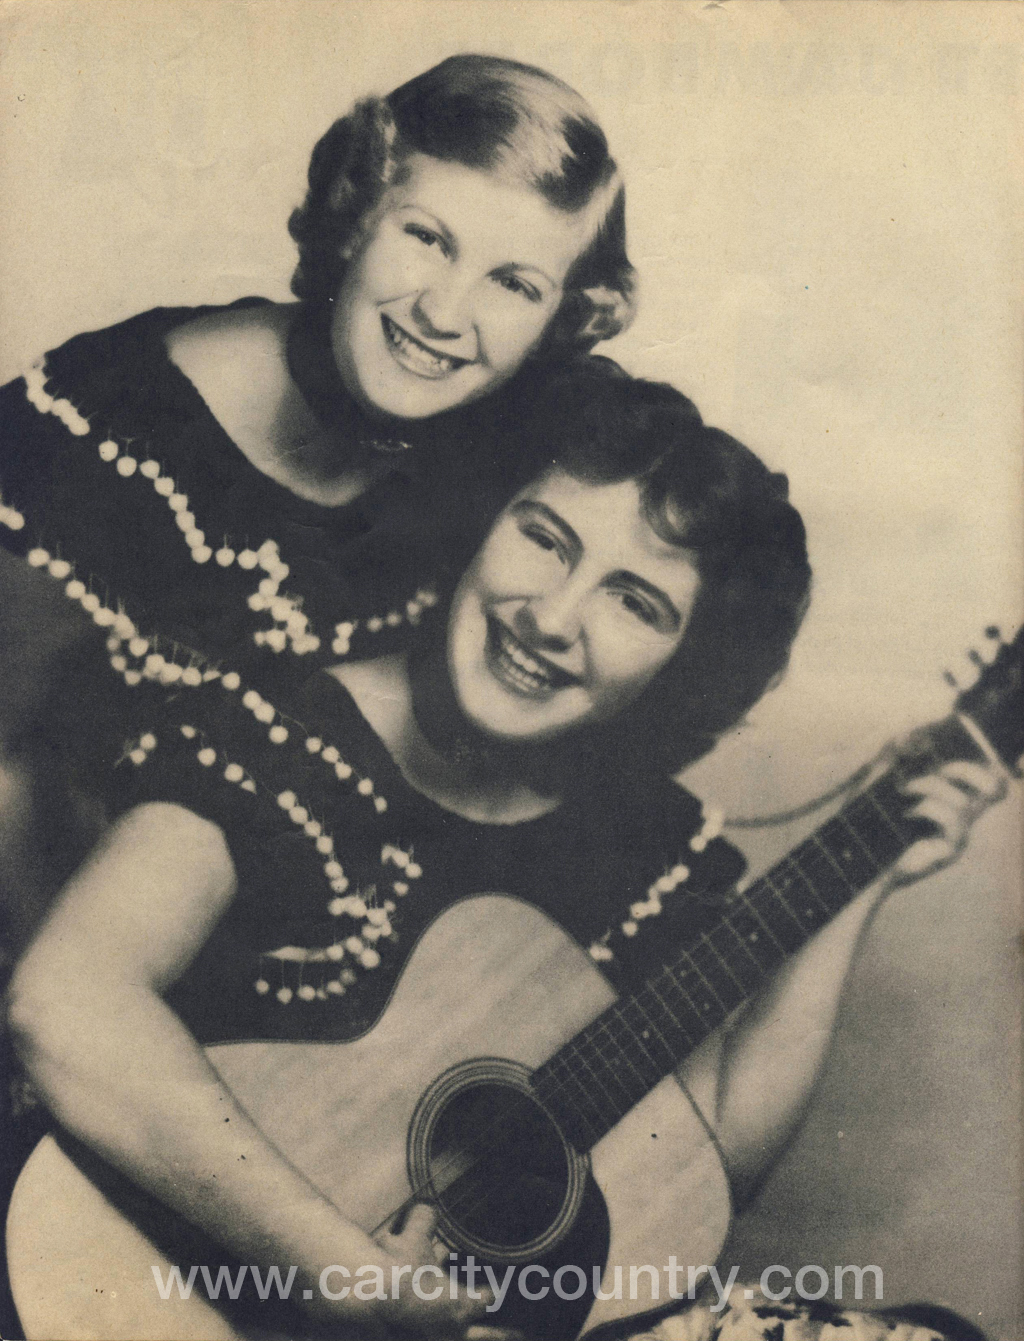 The Davis Sisters, Skeeter and Betty Jack, 1953 promotional portrait